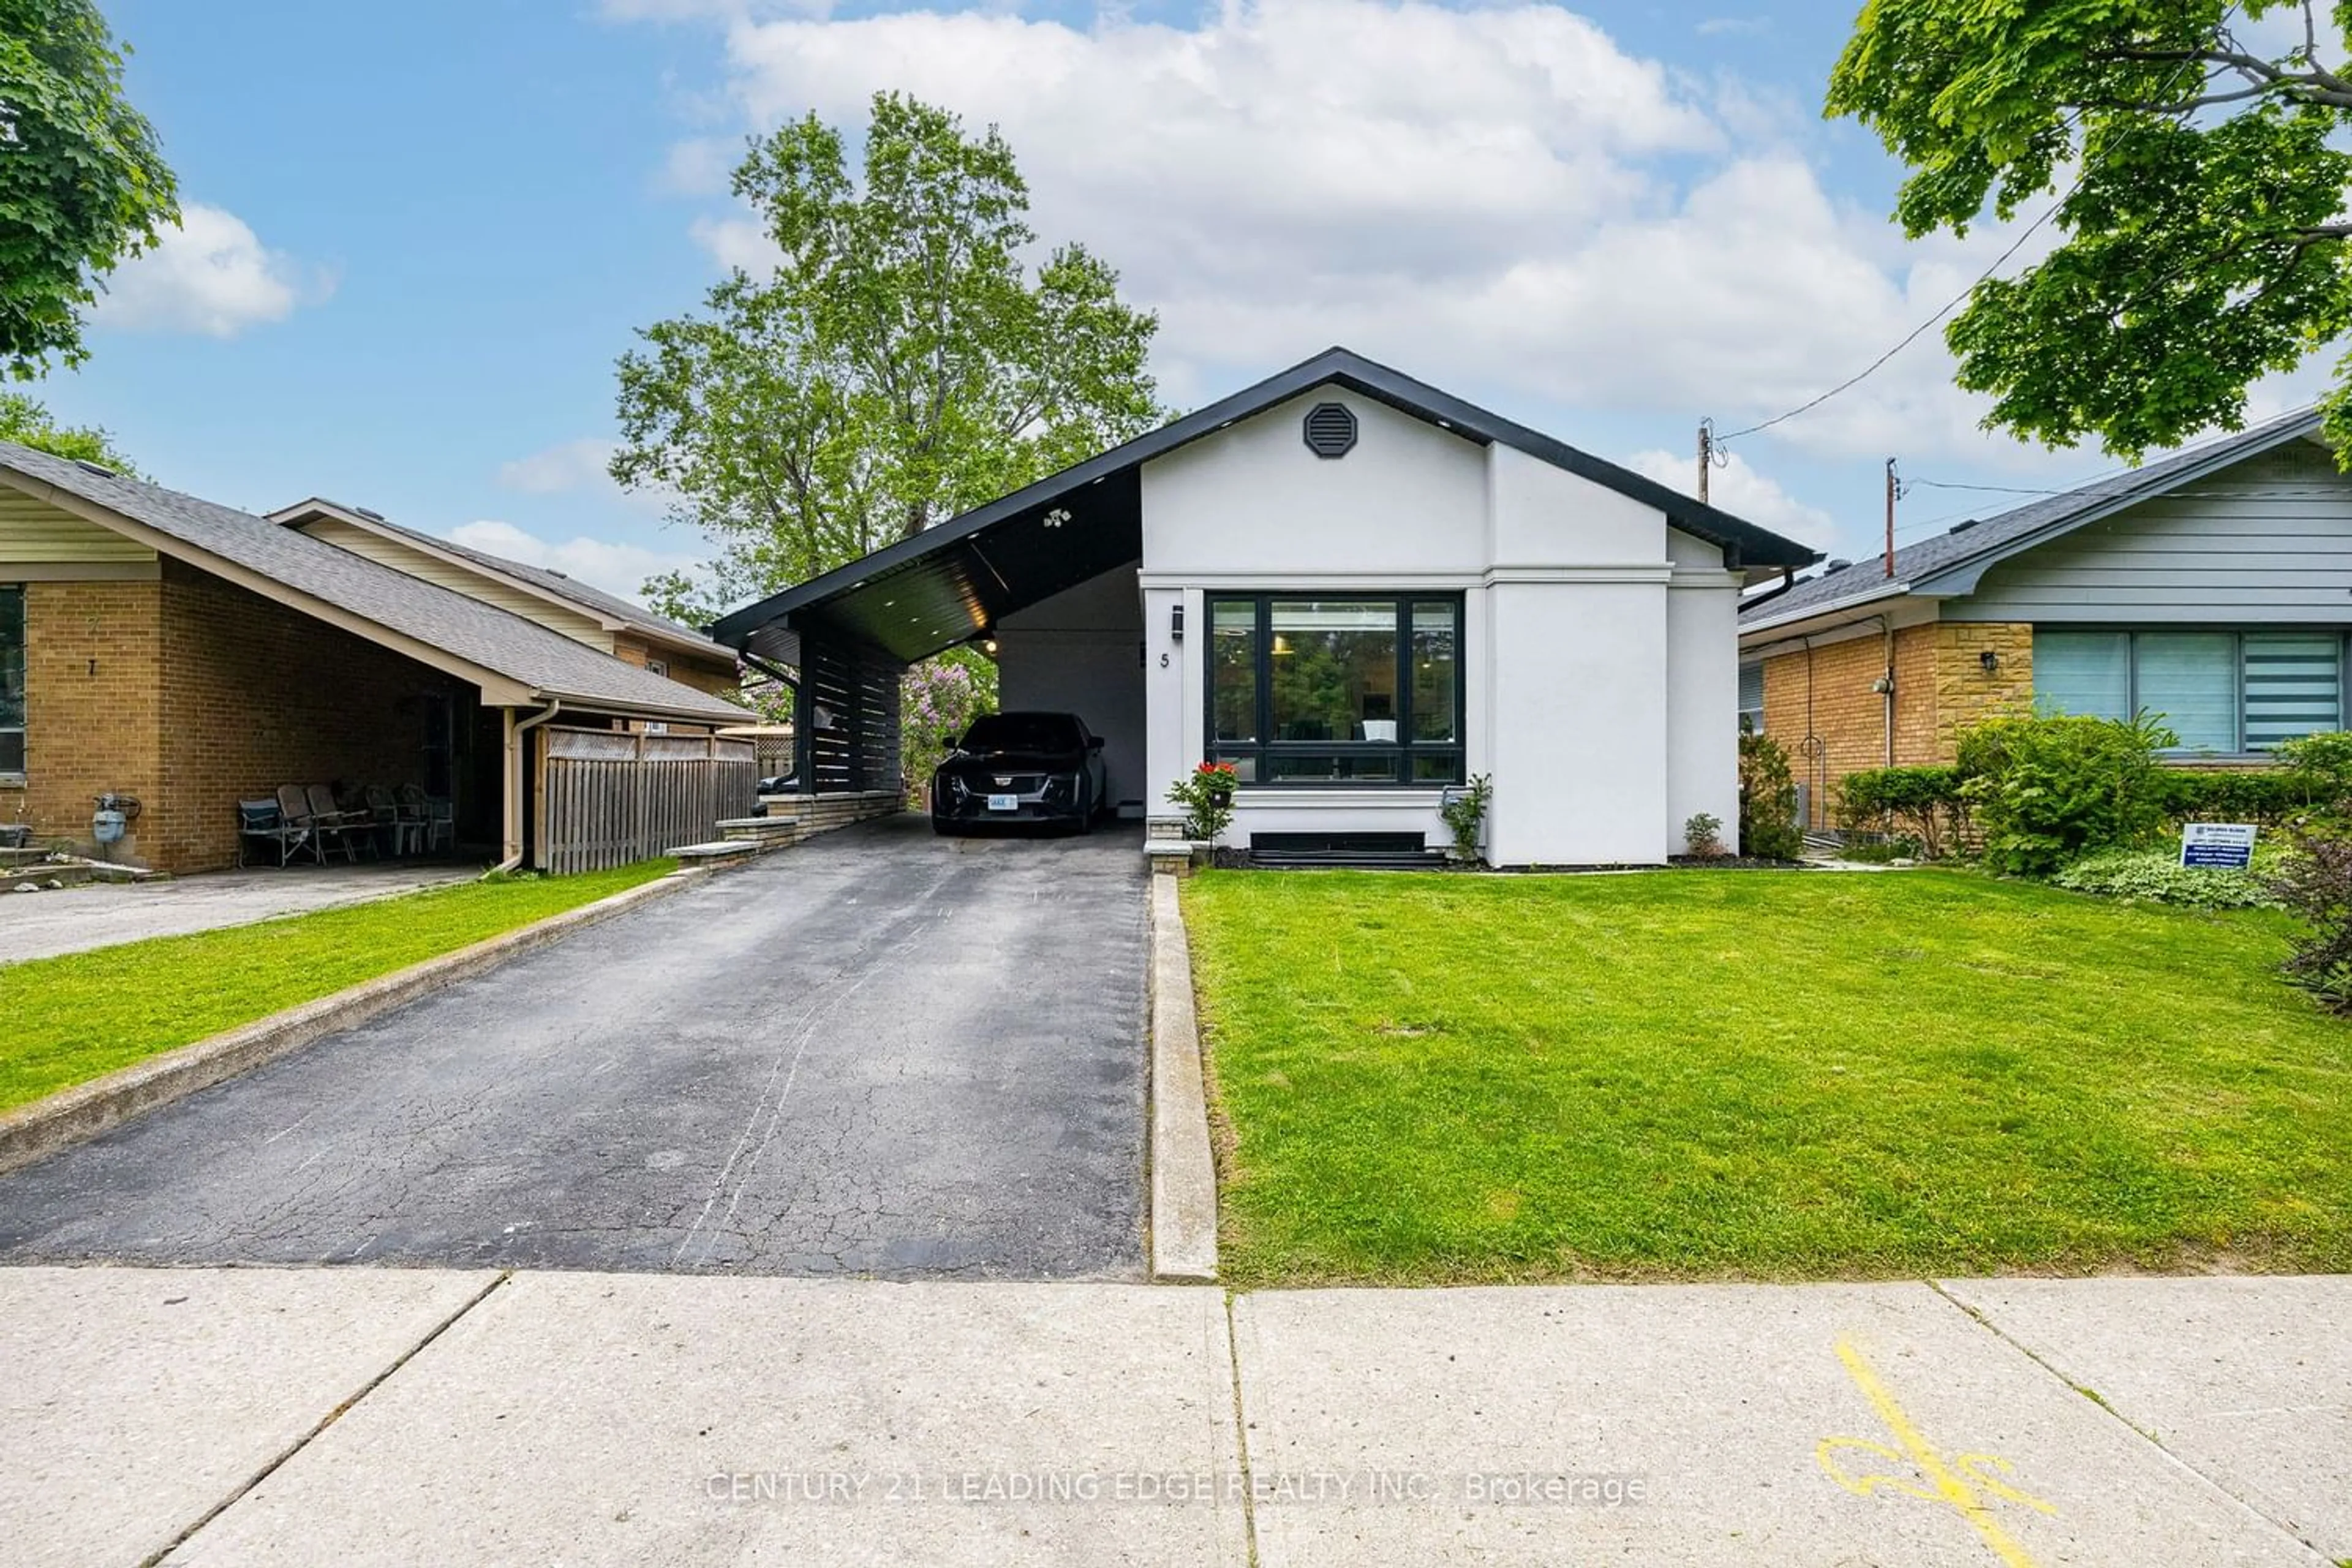 Frontside or backside of a home for 5 Westhampton Dr, Toronto Ontario M9R 1X7